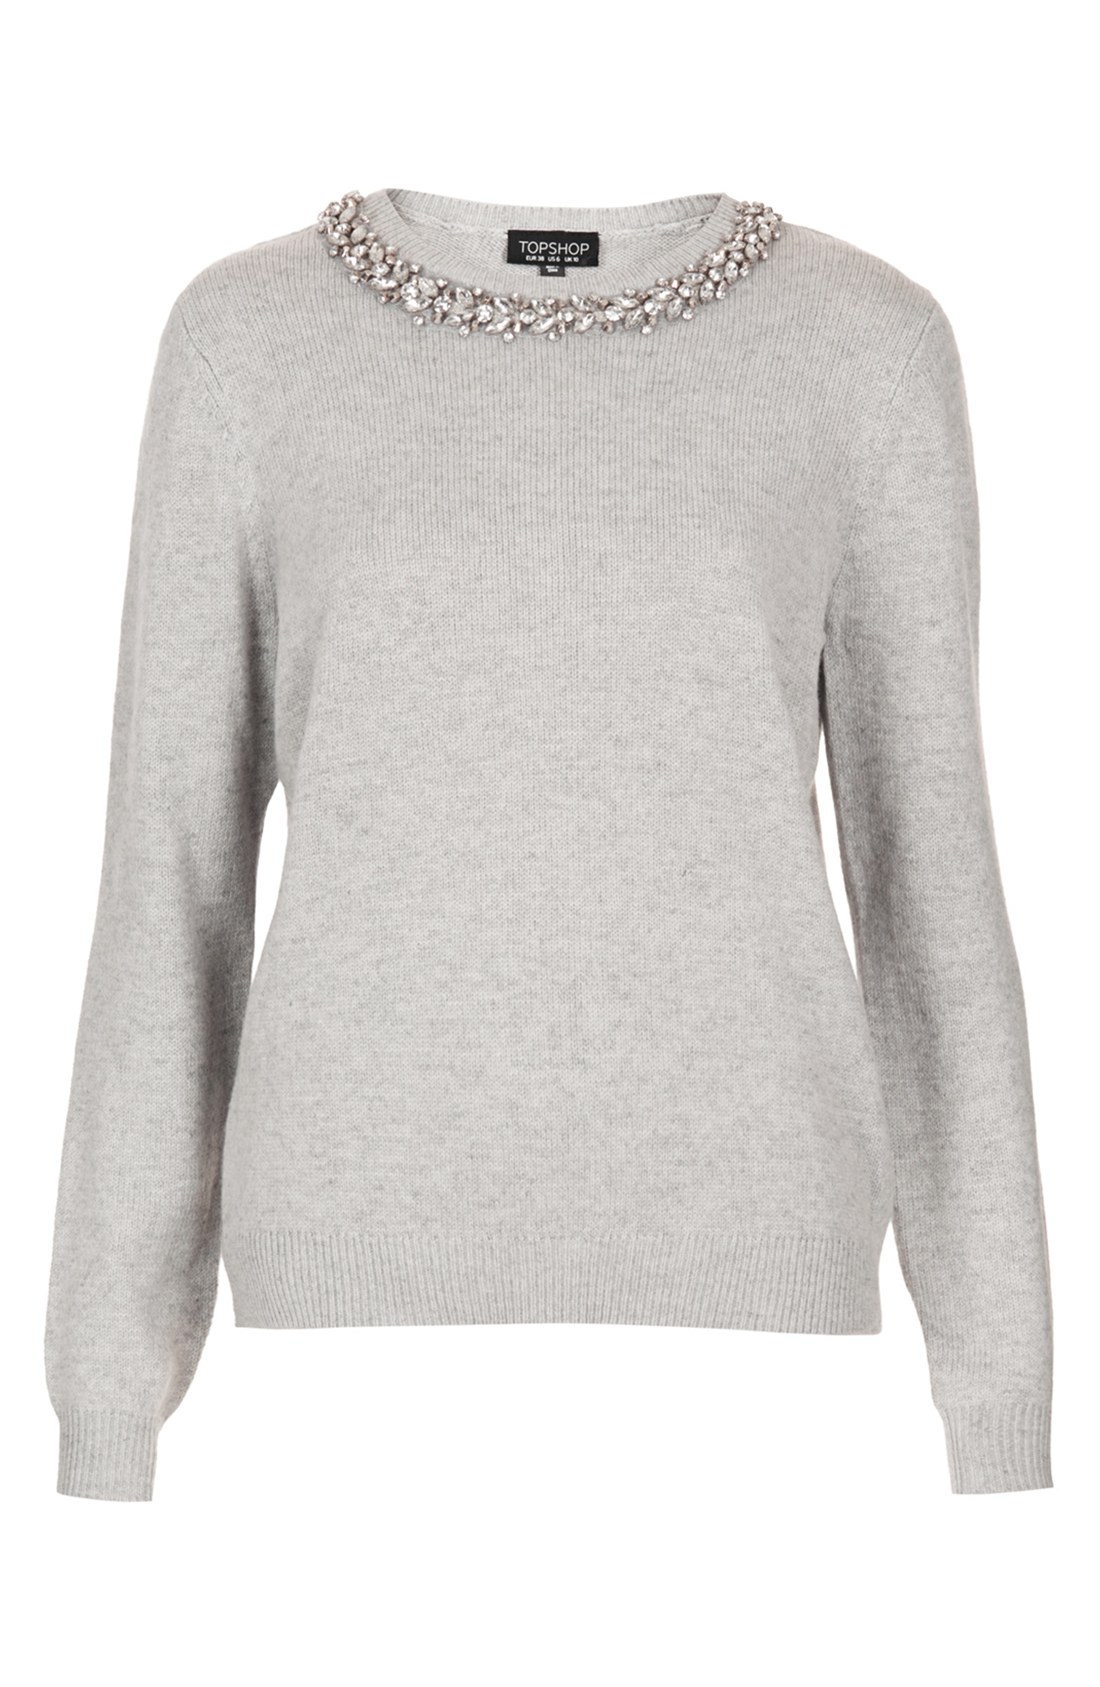 Topshop Knitted Crystal Stud Jumper in Gray (GREY MARL) | Lyst